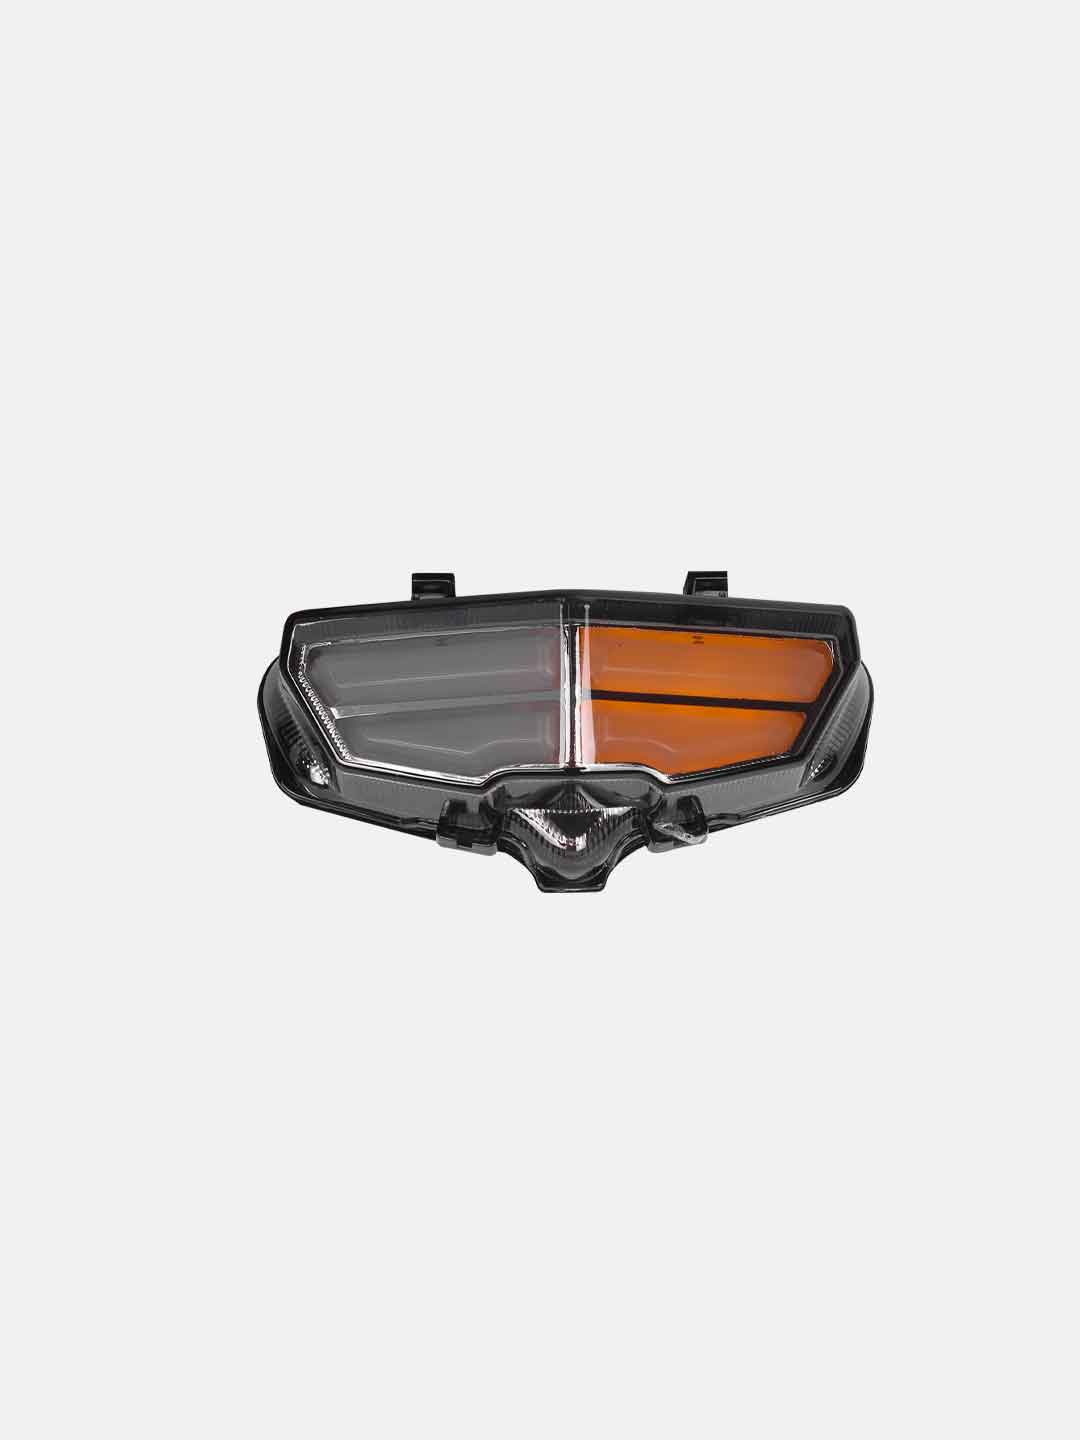 Integrated Tail Light 2.0 For Yamaha MT15